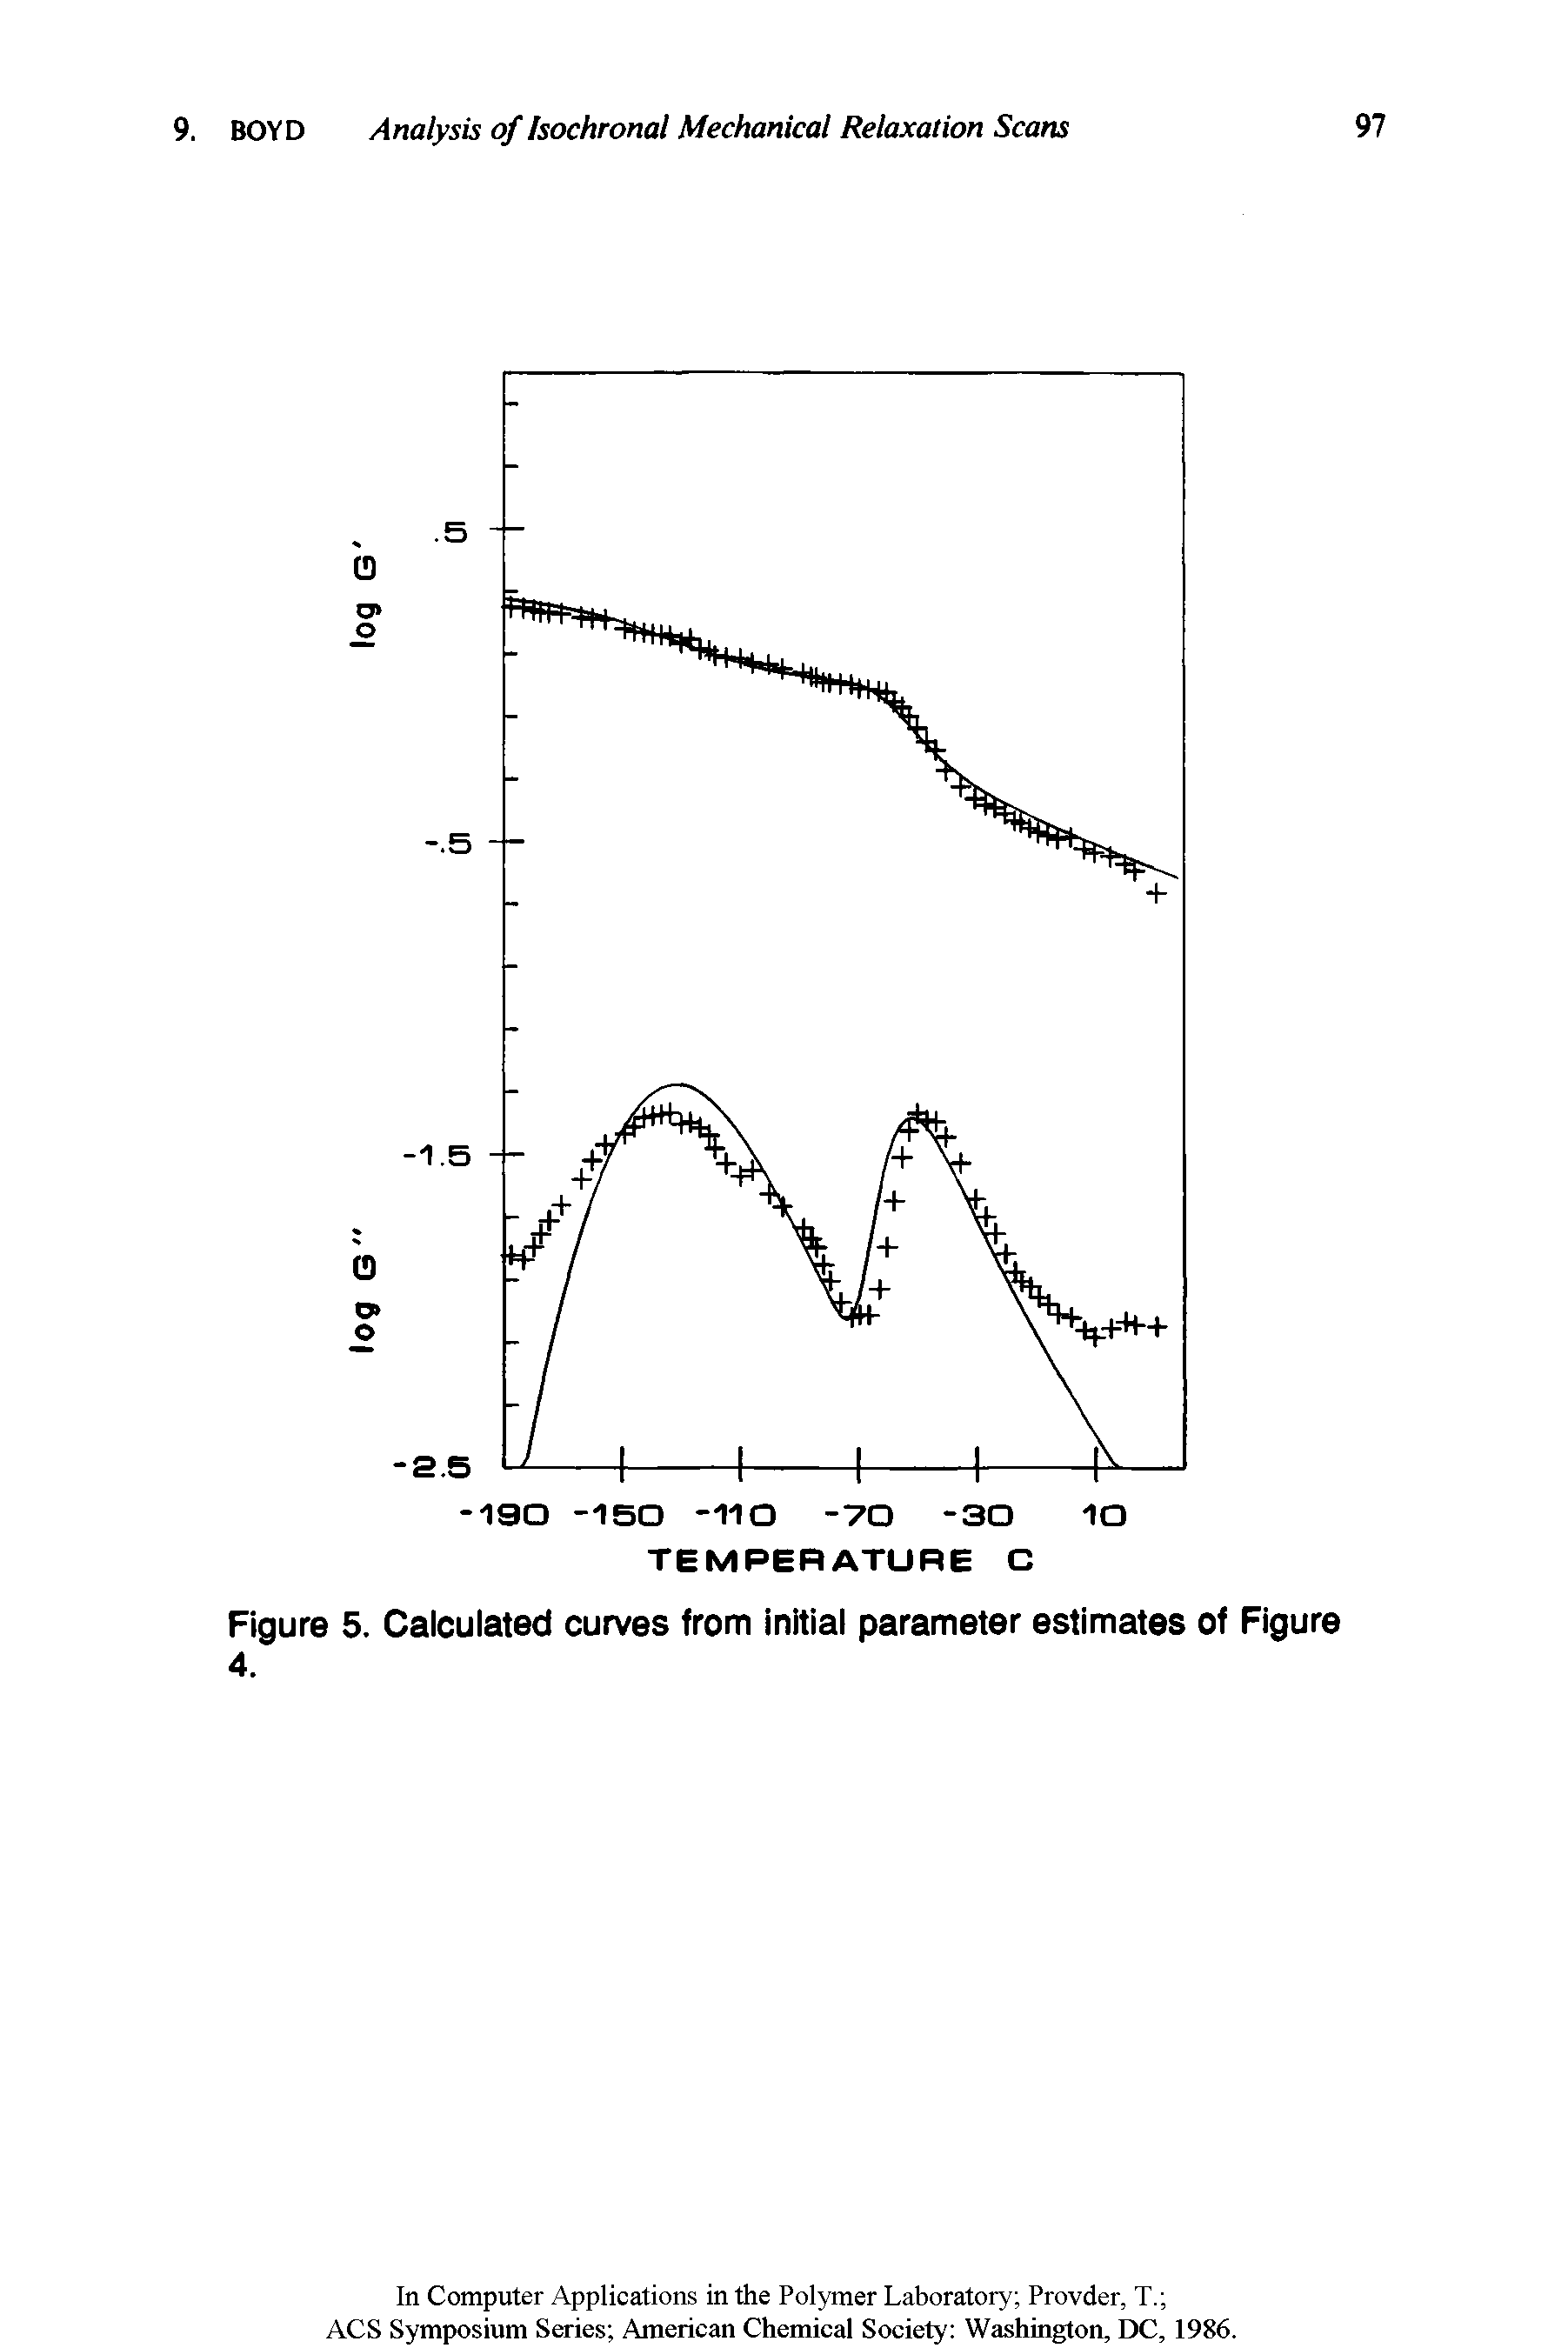 Figure 5. Calculated curves from initial parameter estimates of Figure 4.